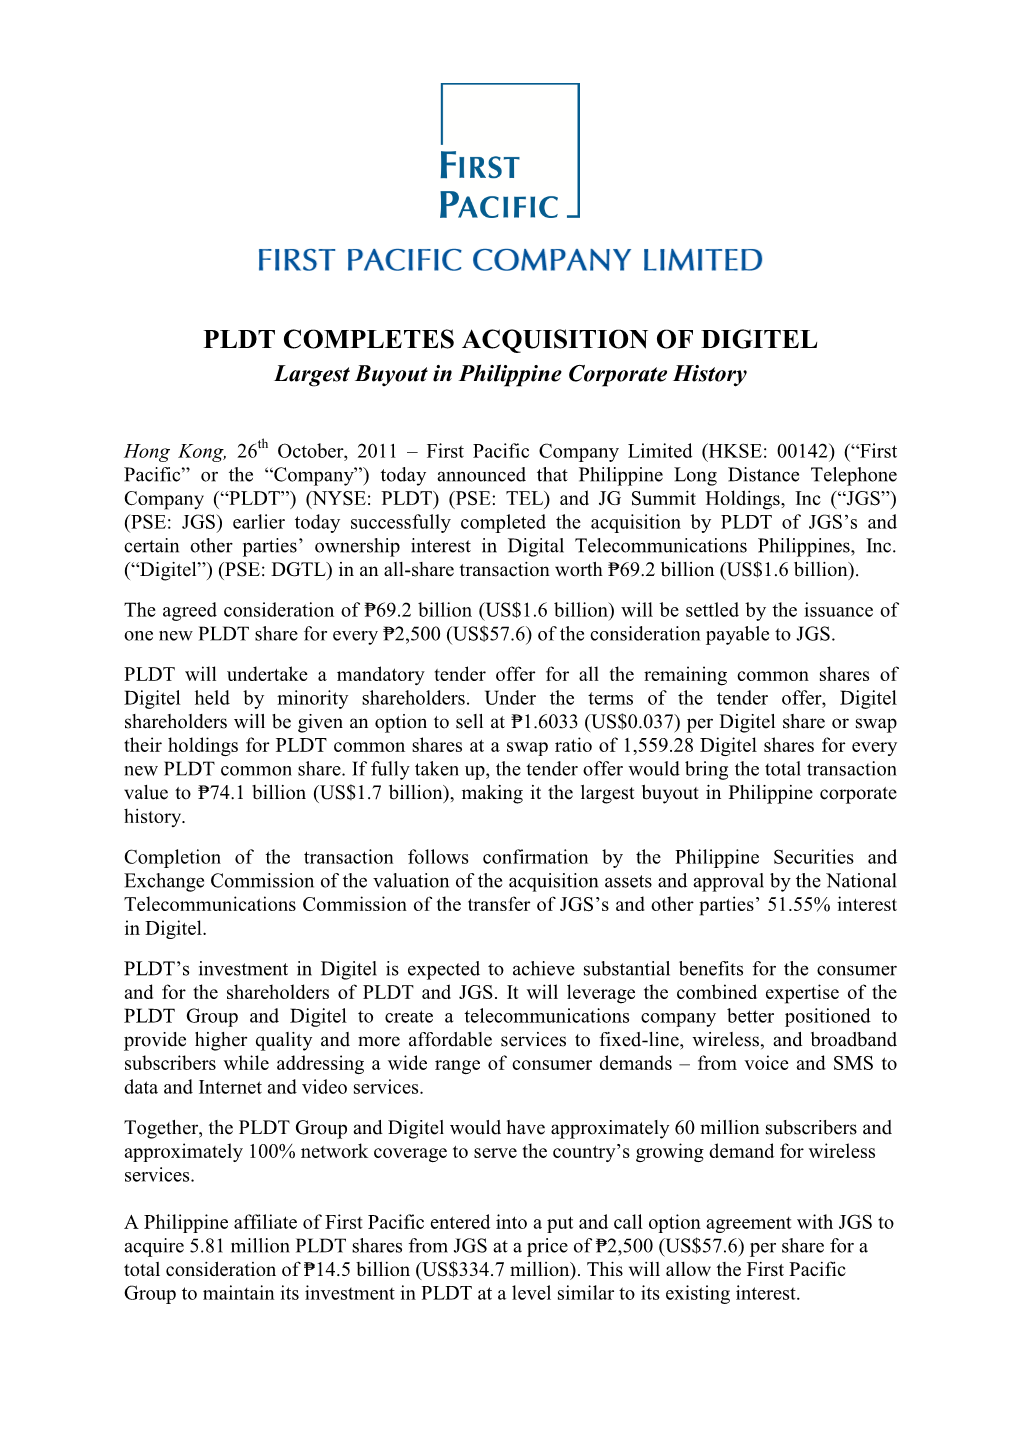 PLDT COMPLETES ACQUISITION of DIGITEL Largest Buyout in Philippine Corporate History